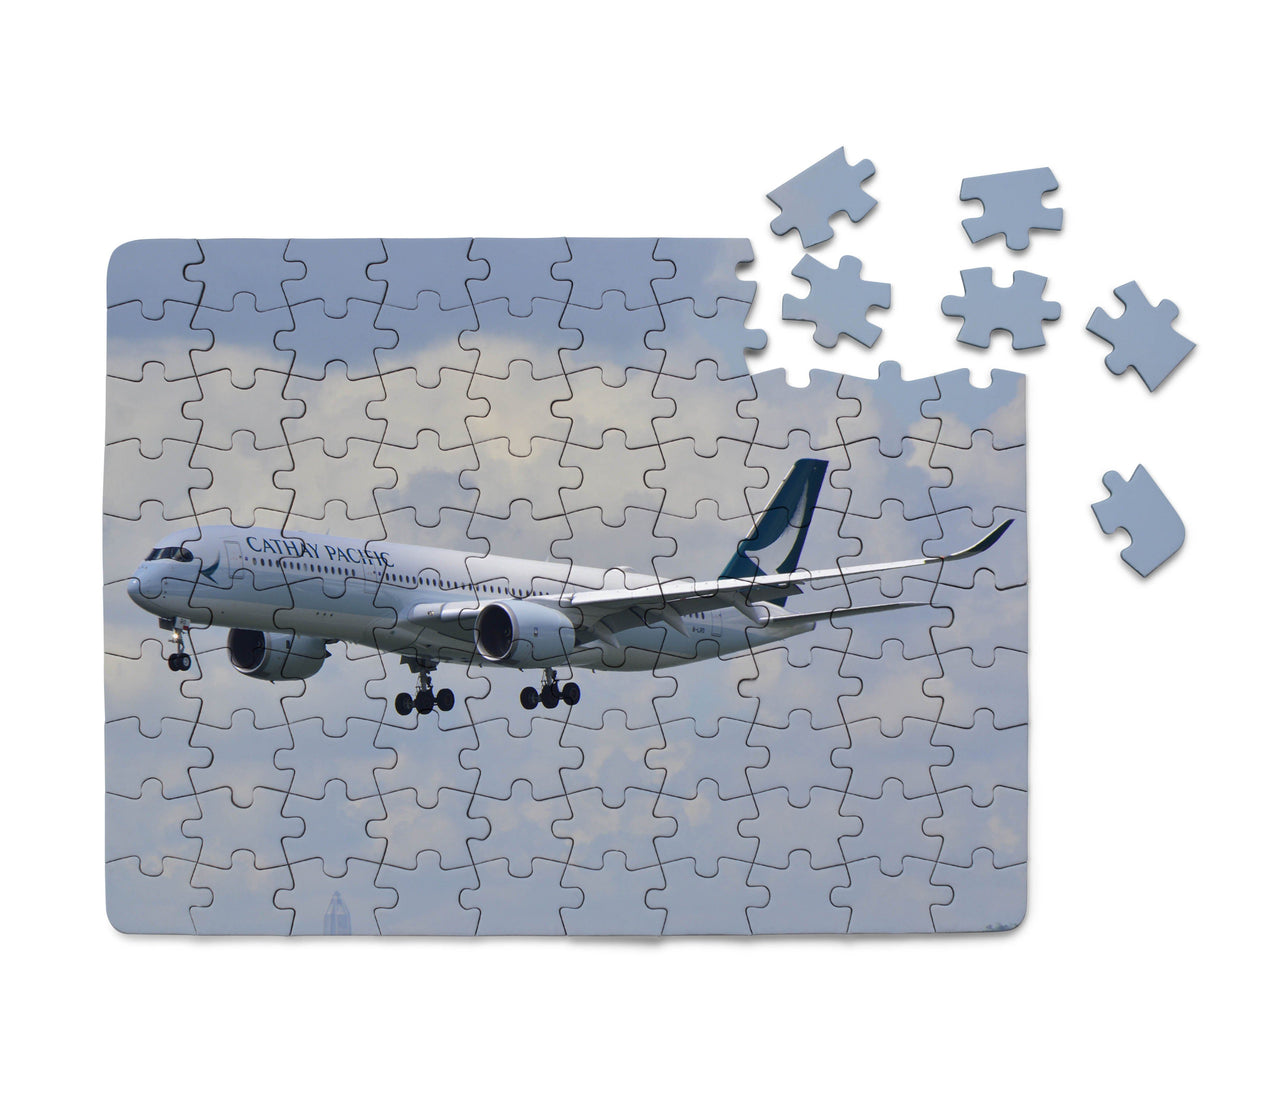 Cathay Pacific Airbus A350 Printed Puzzles Aviation Shop 